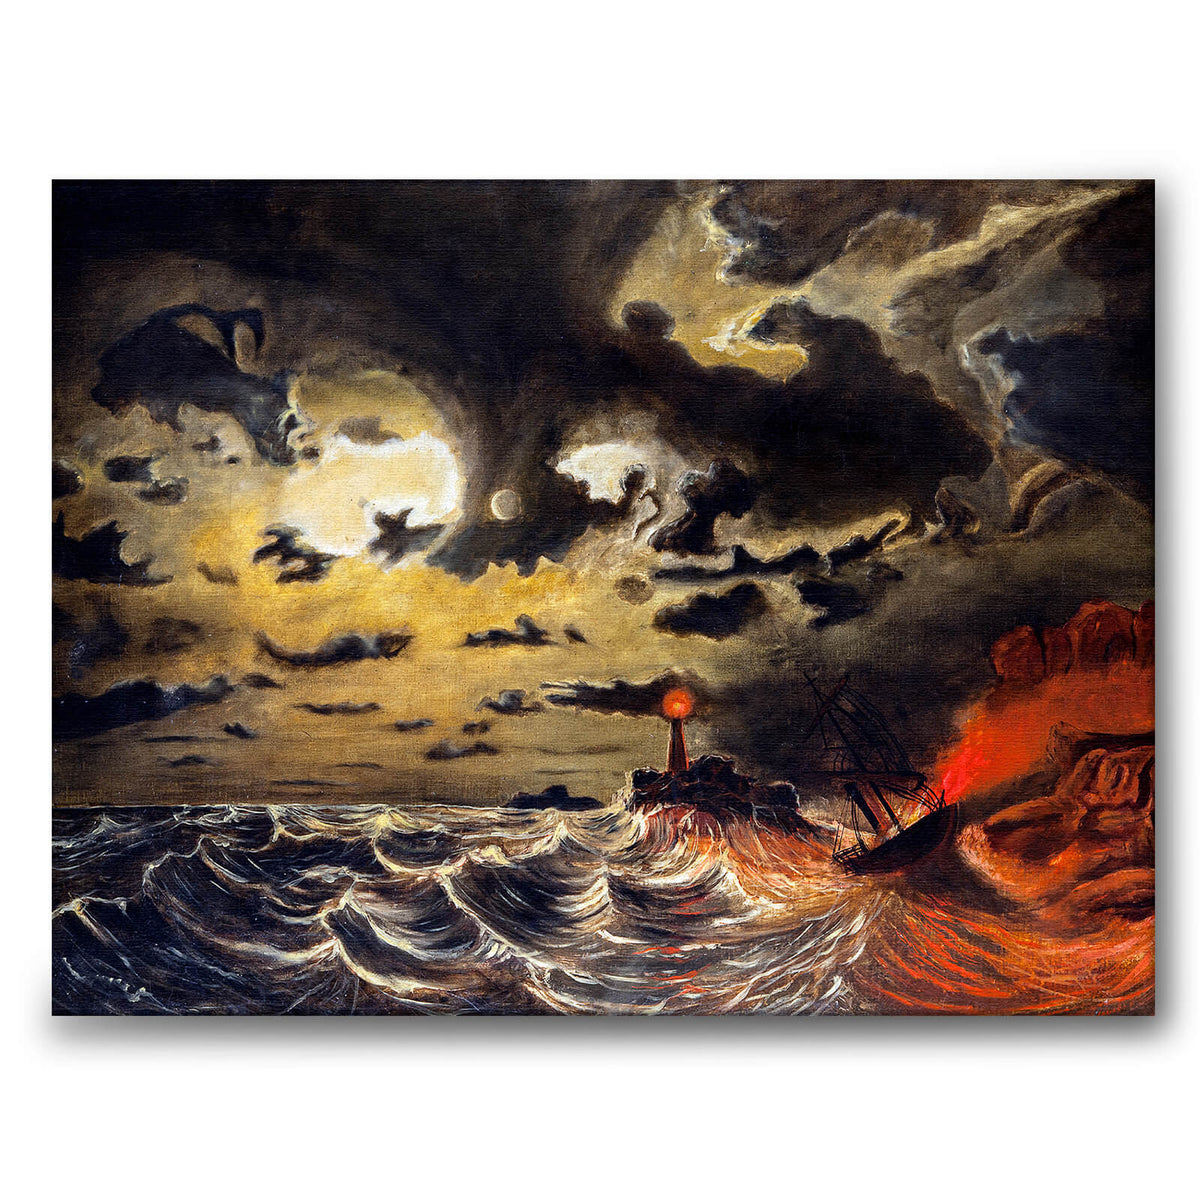 Steamer in flames - Canvas